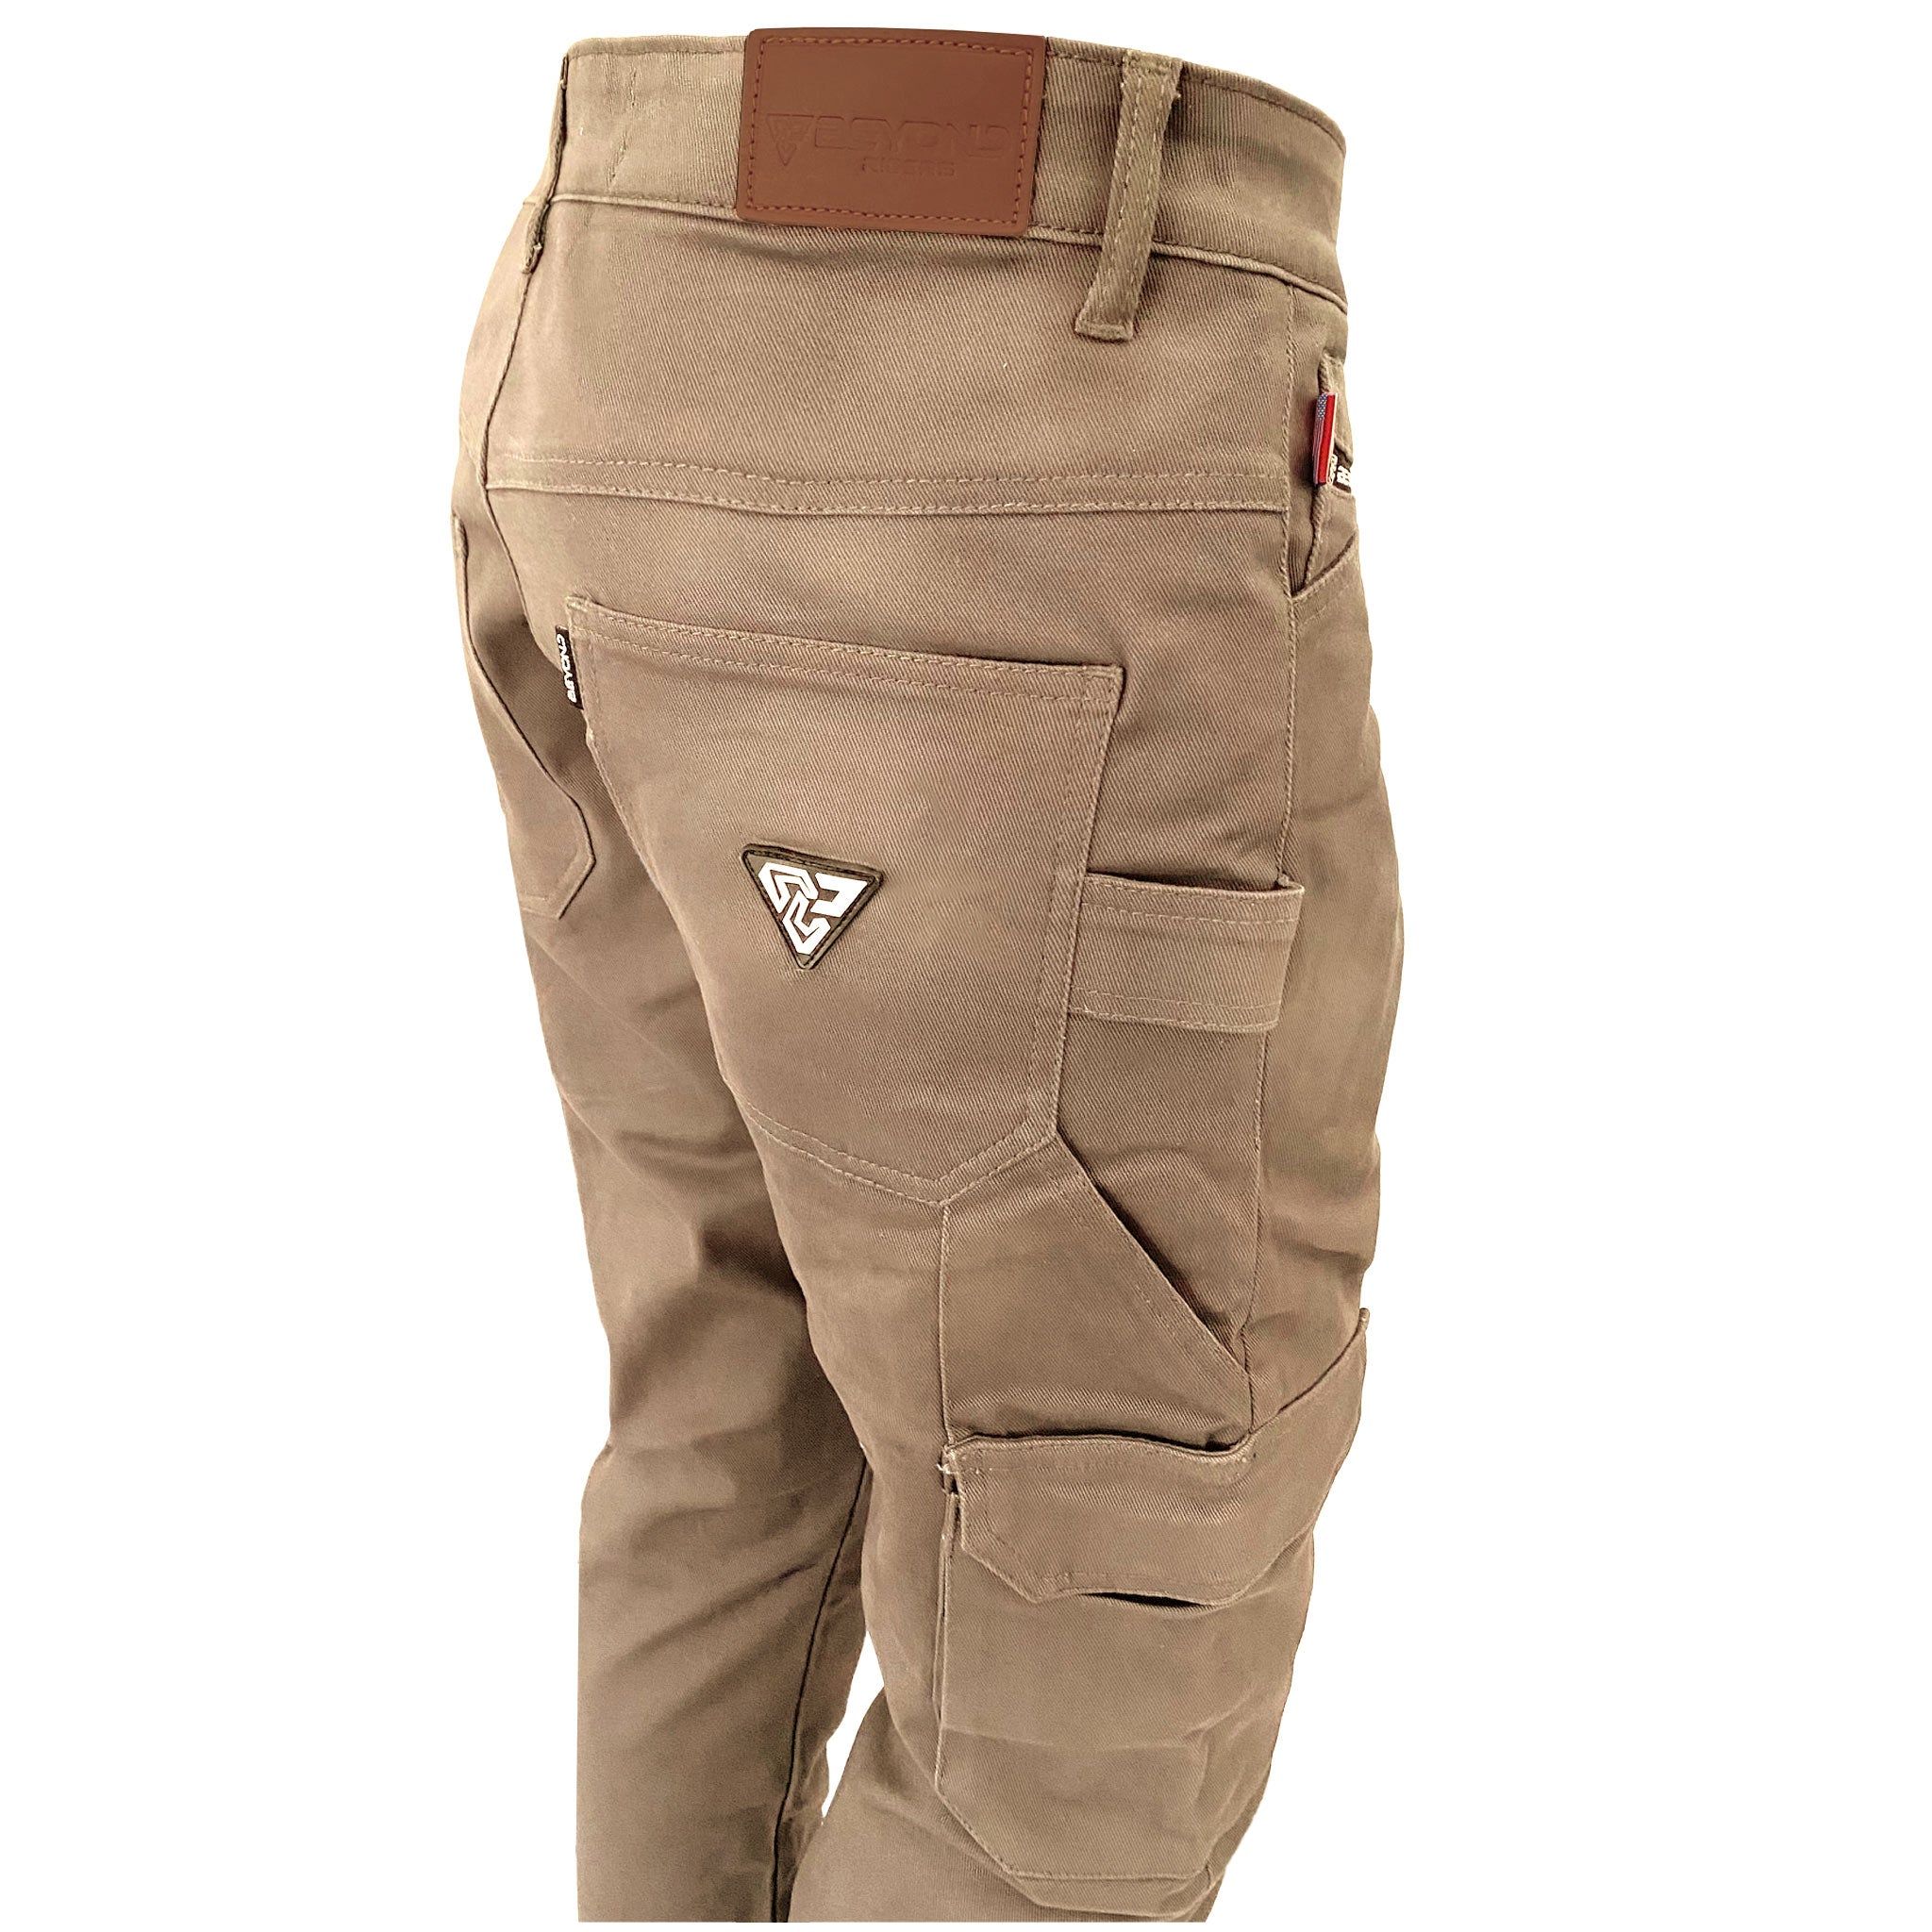 Straight Leg Cargo Pants - Khaki Solid with Pads